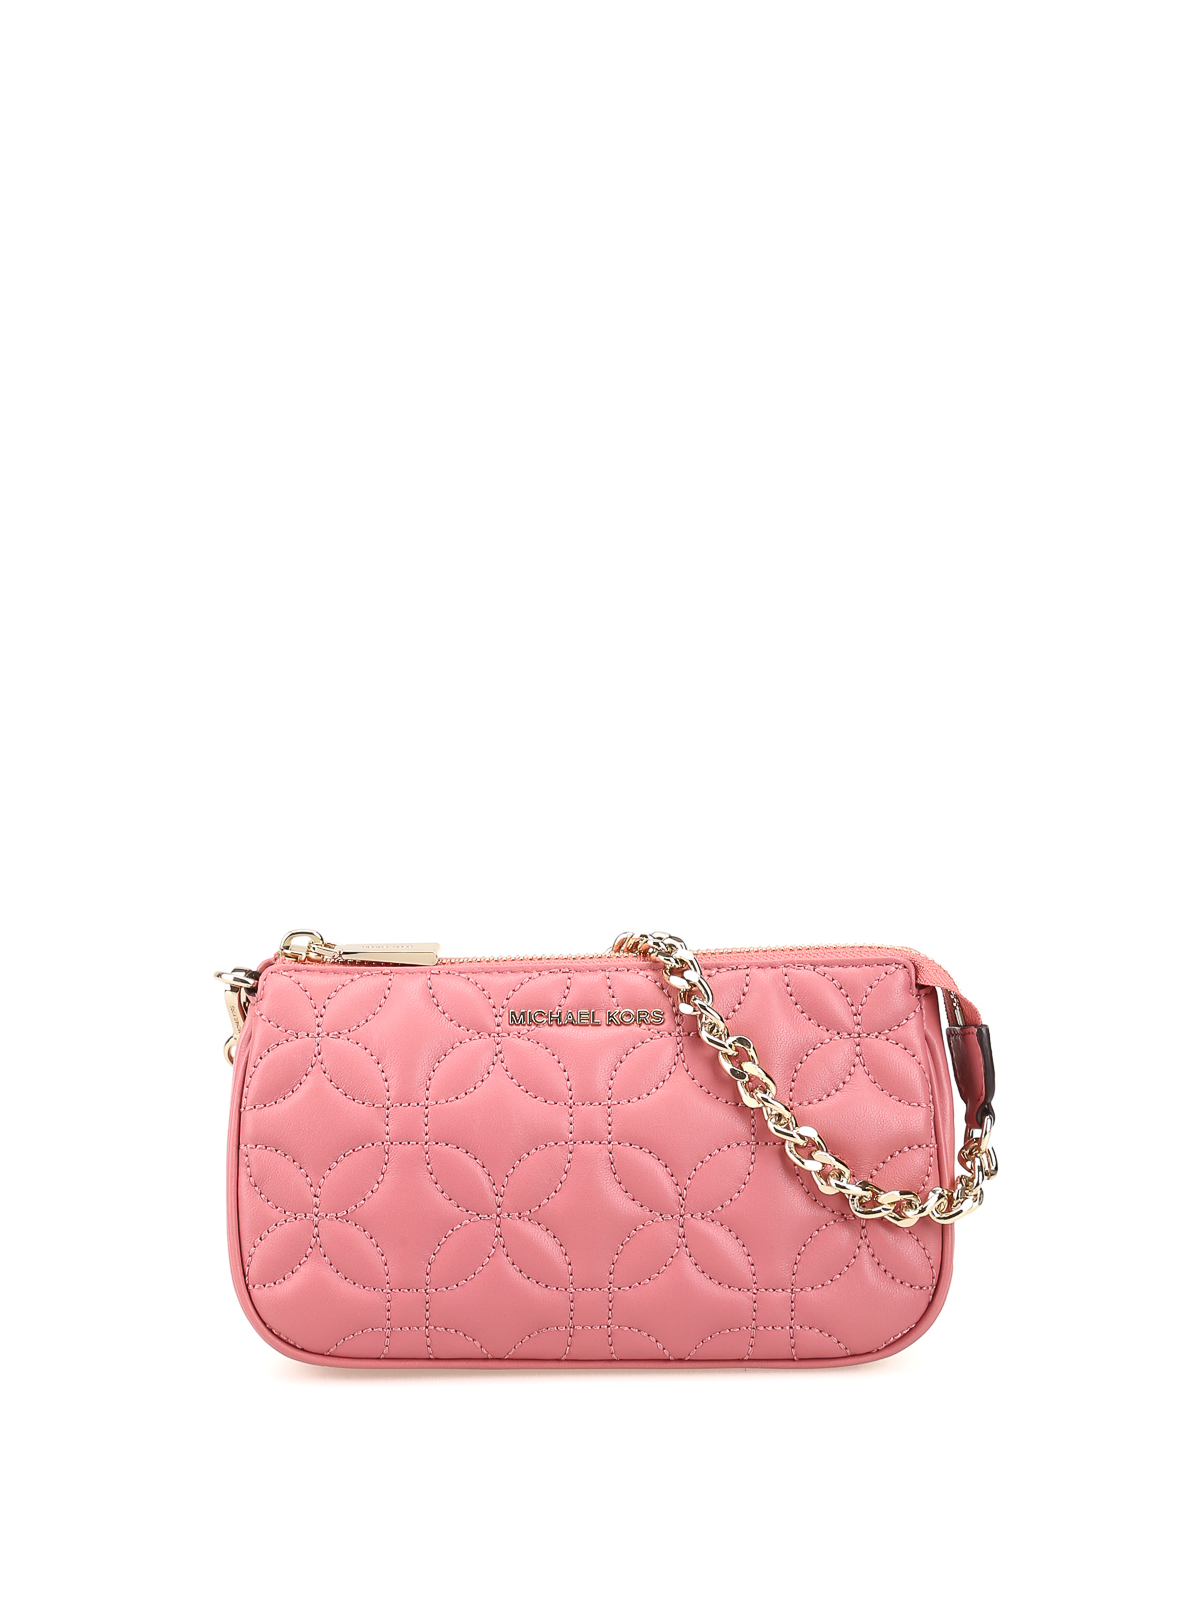 Michael Kors - MD Chain pink quilted leather clutch - clutches ...